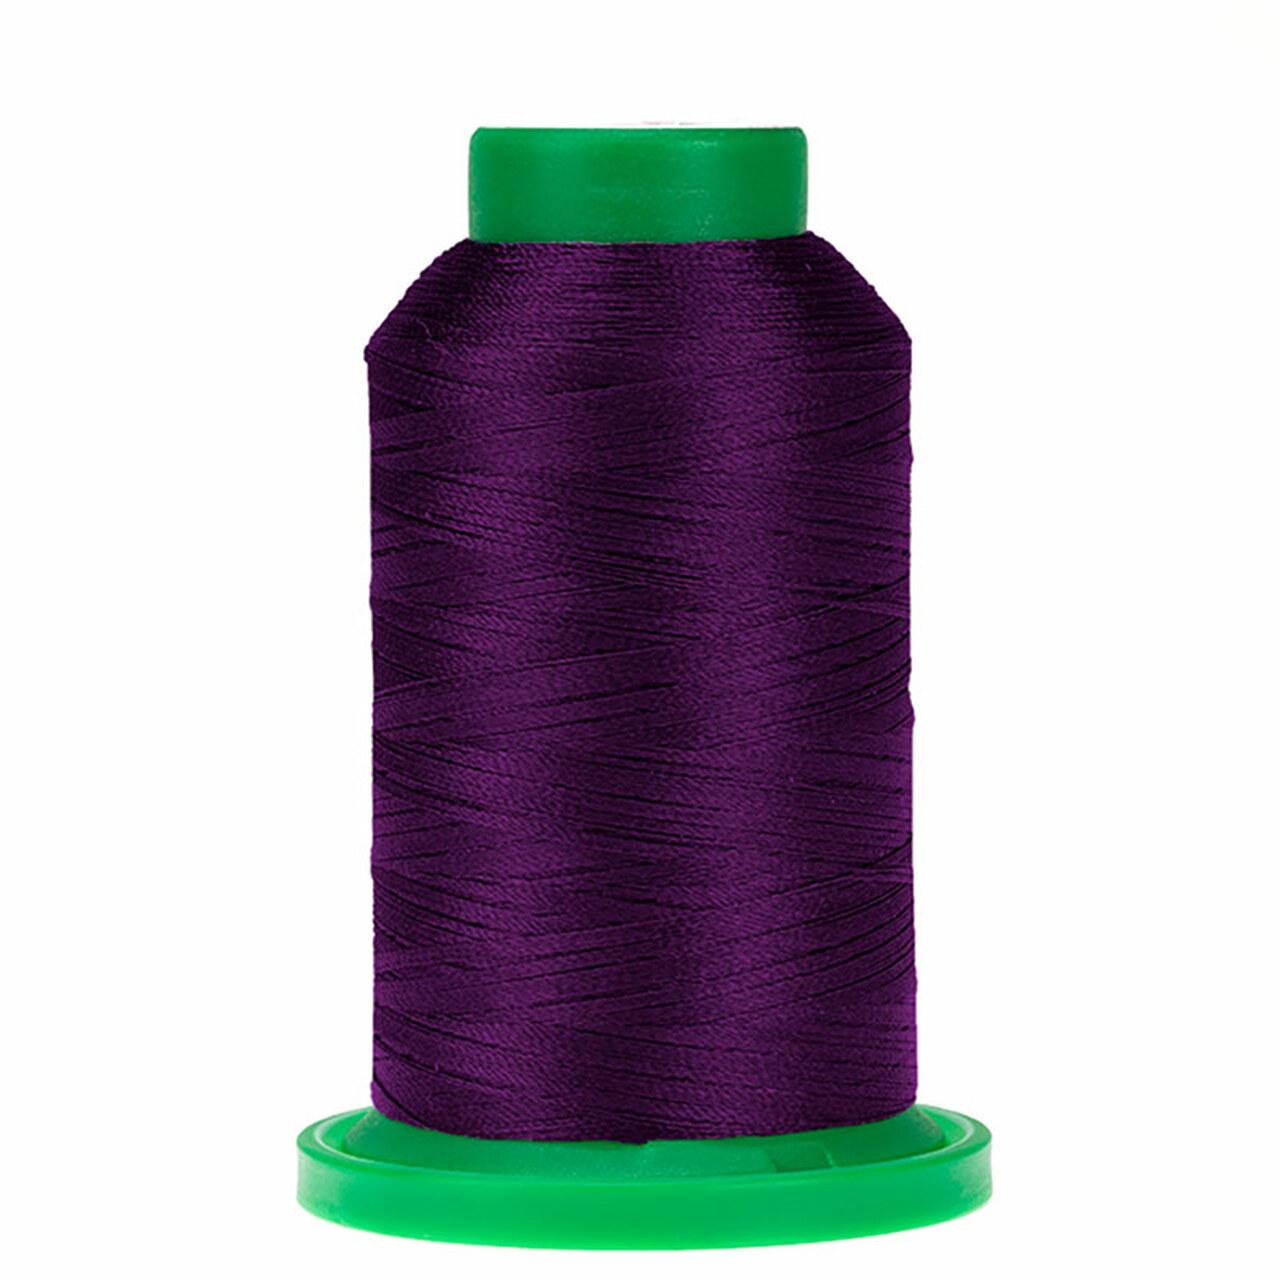 Thread - Isacord - Pansy - 2922-2715